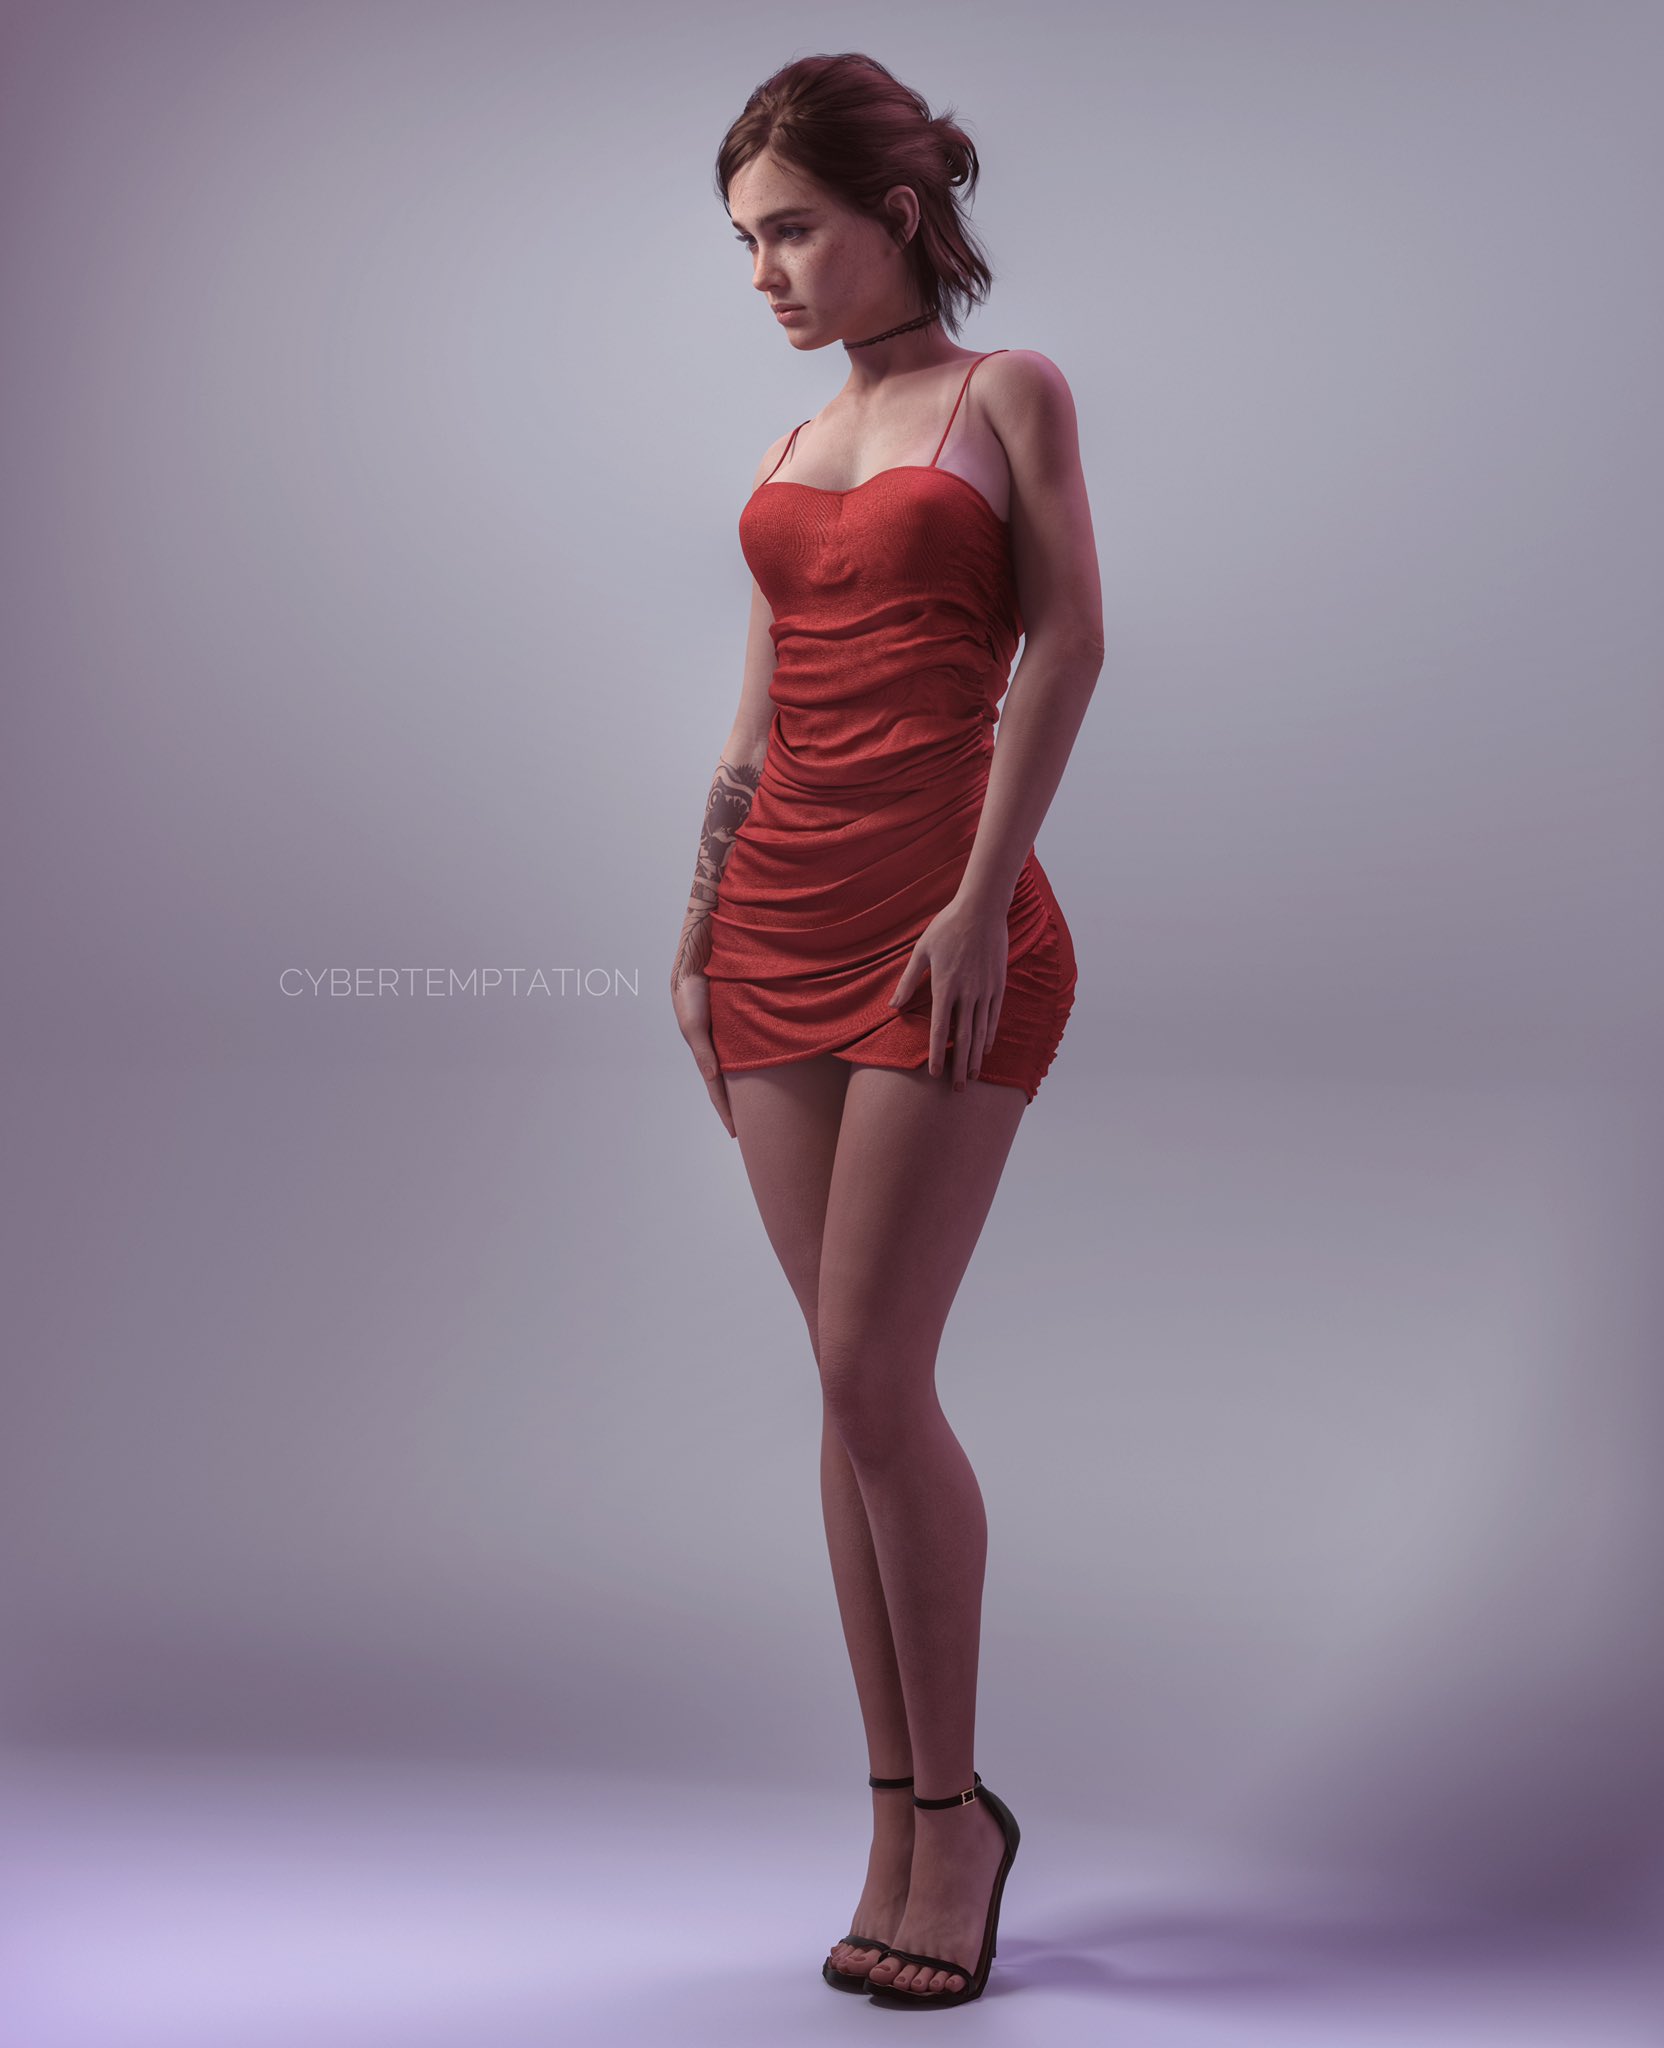 General 1664x2048 The Last of Us The Last of Us 2 Ellie Williams video game characters video game girls tattoo dress red dress CGI high heels Cyber Temptation